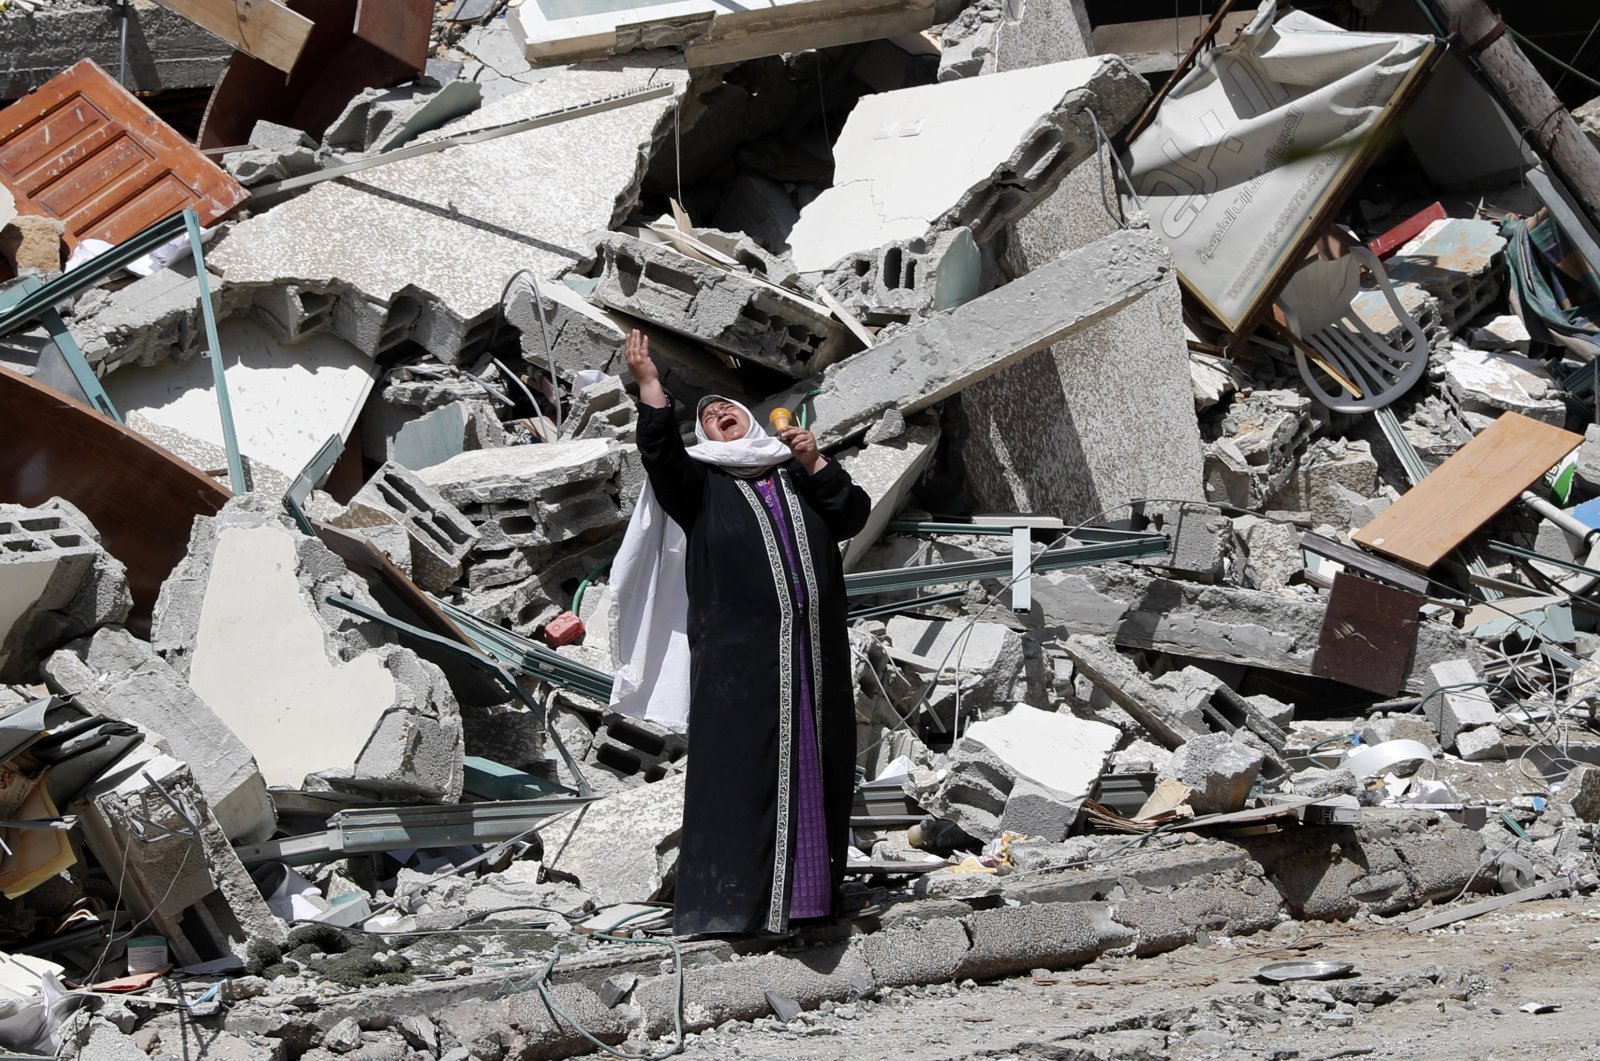 A woman reacts while standing near the rubble of a building that was destroyed by an Israeli airstrike in the Gaza Strip, Palestine, May 16, 2021. (AP Photo)